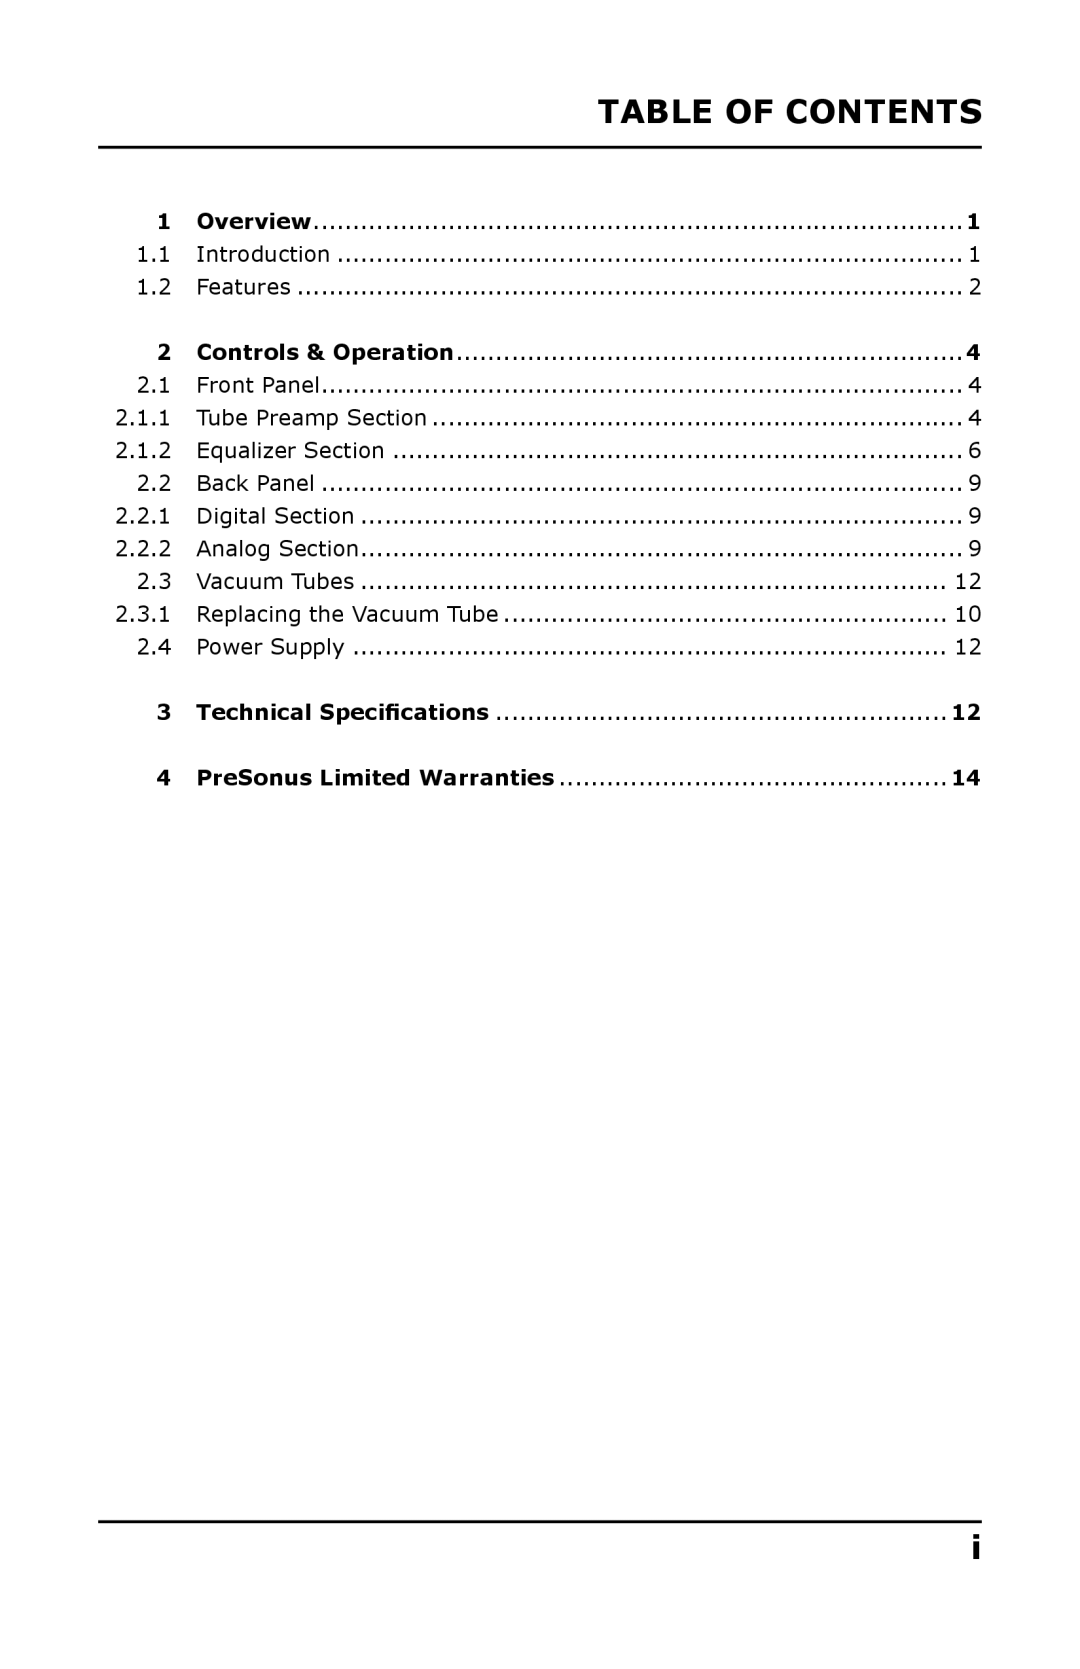 Presonus Audio electronic Single-Channel Tube user manual Table Of Contents, Overview, Vacuum Tubes, Power Supply 